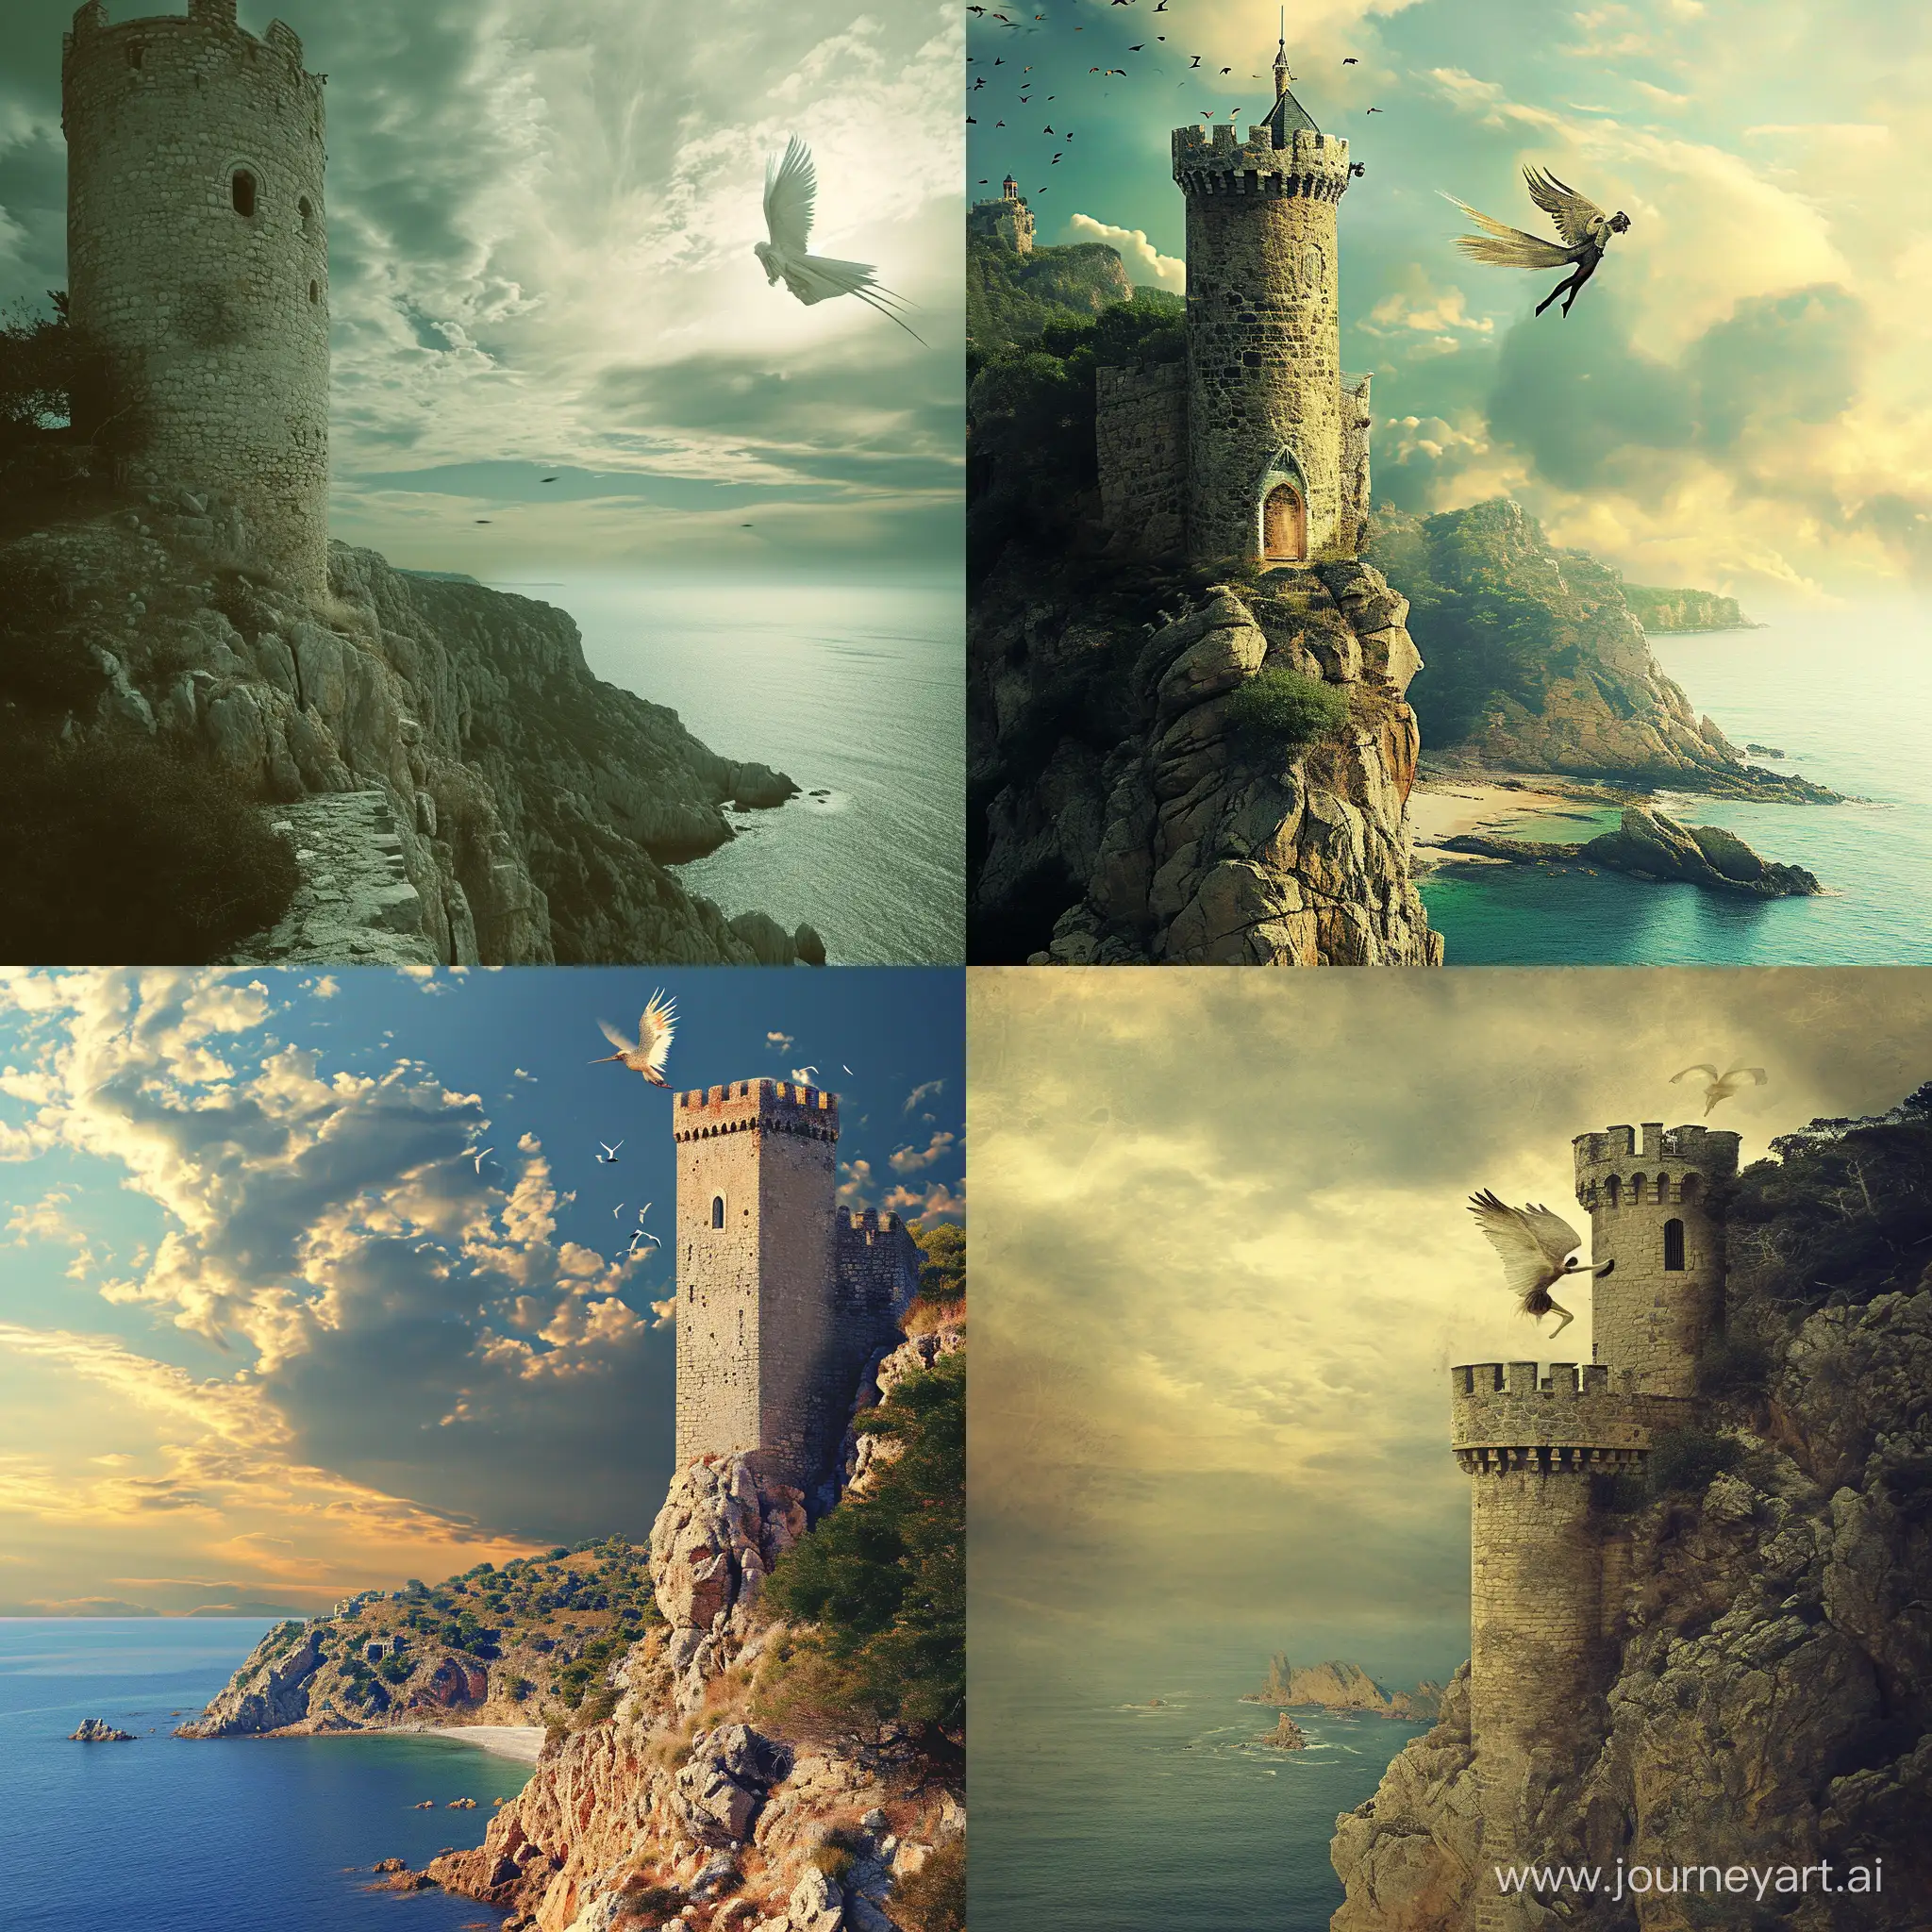 Winged-Human-Soaring-from-Castle-Tower-to-Shore-on-Hilltop